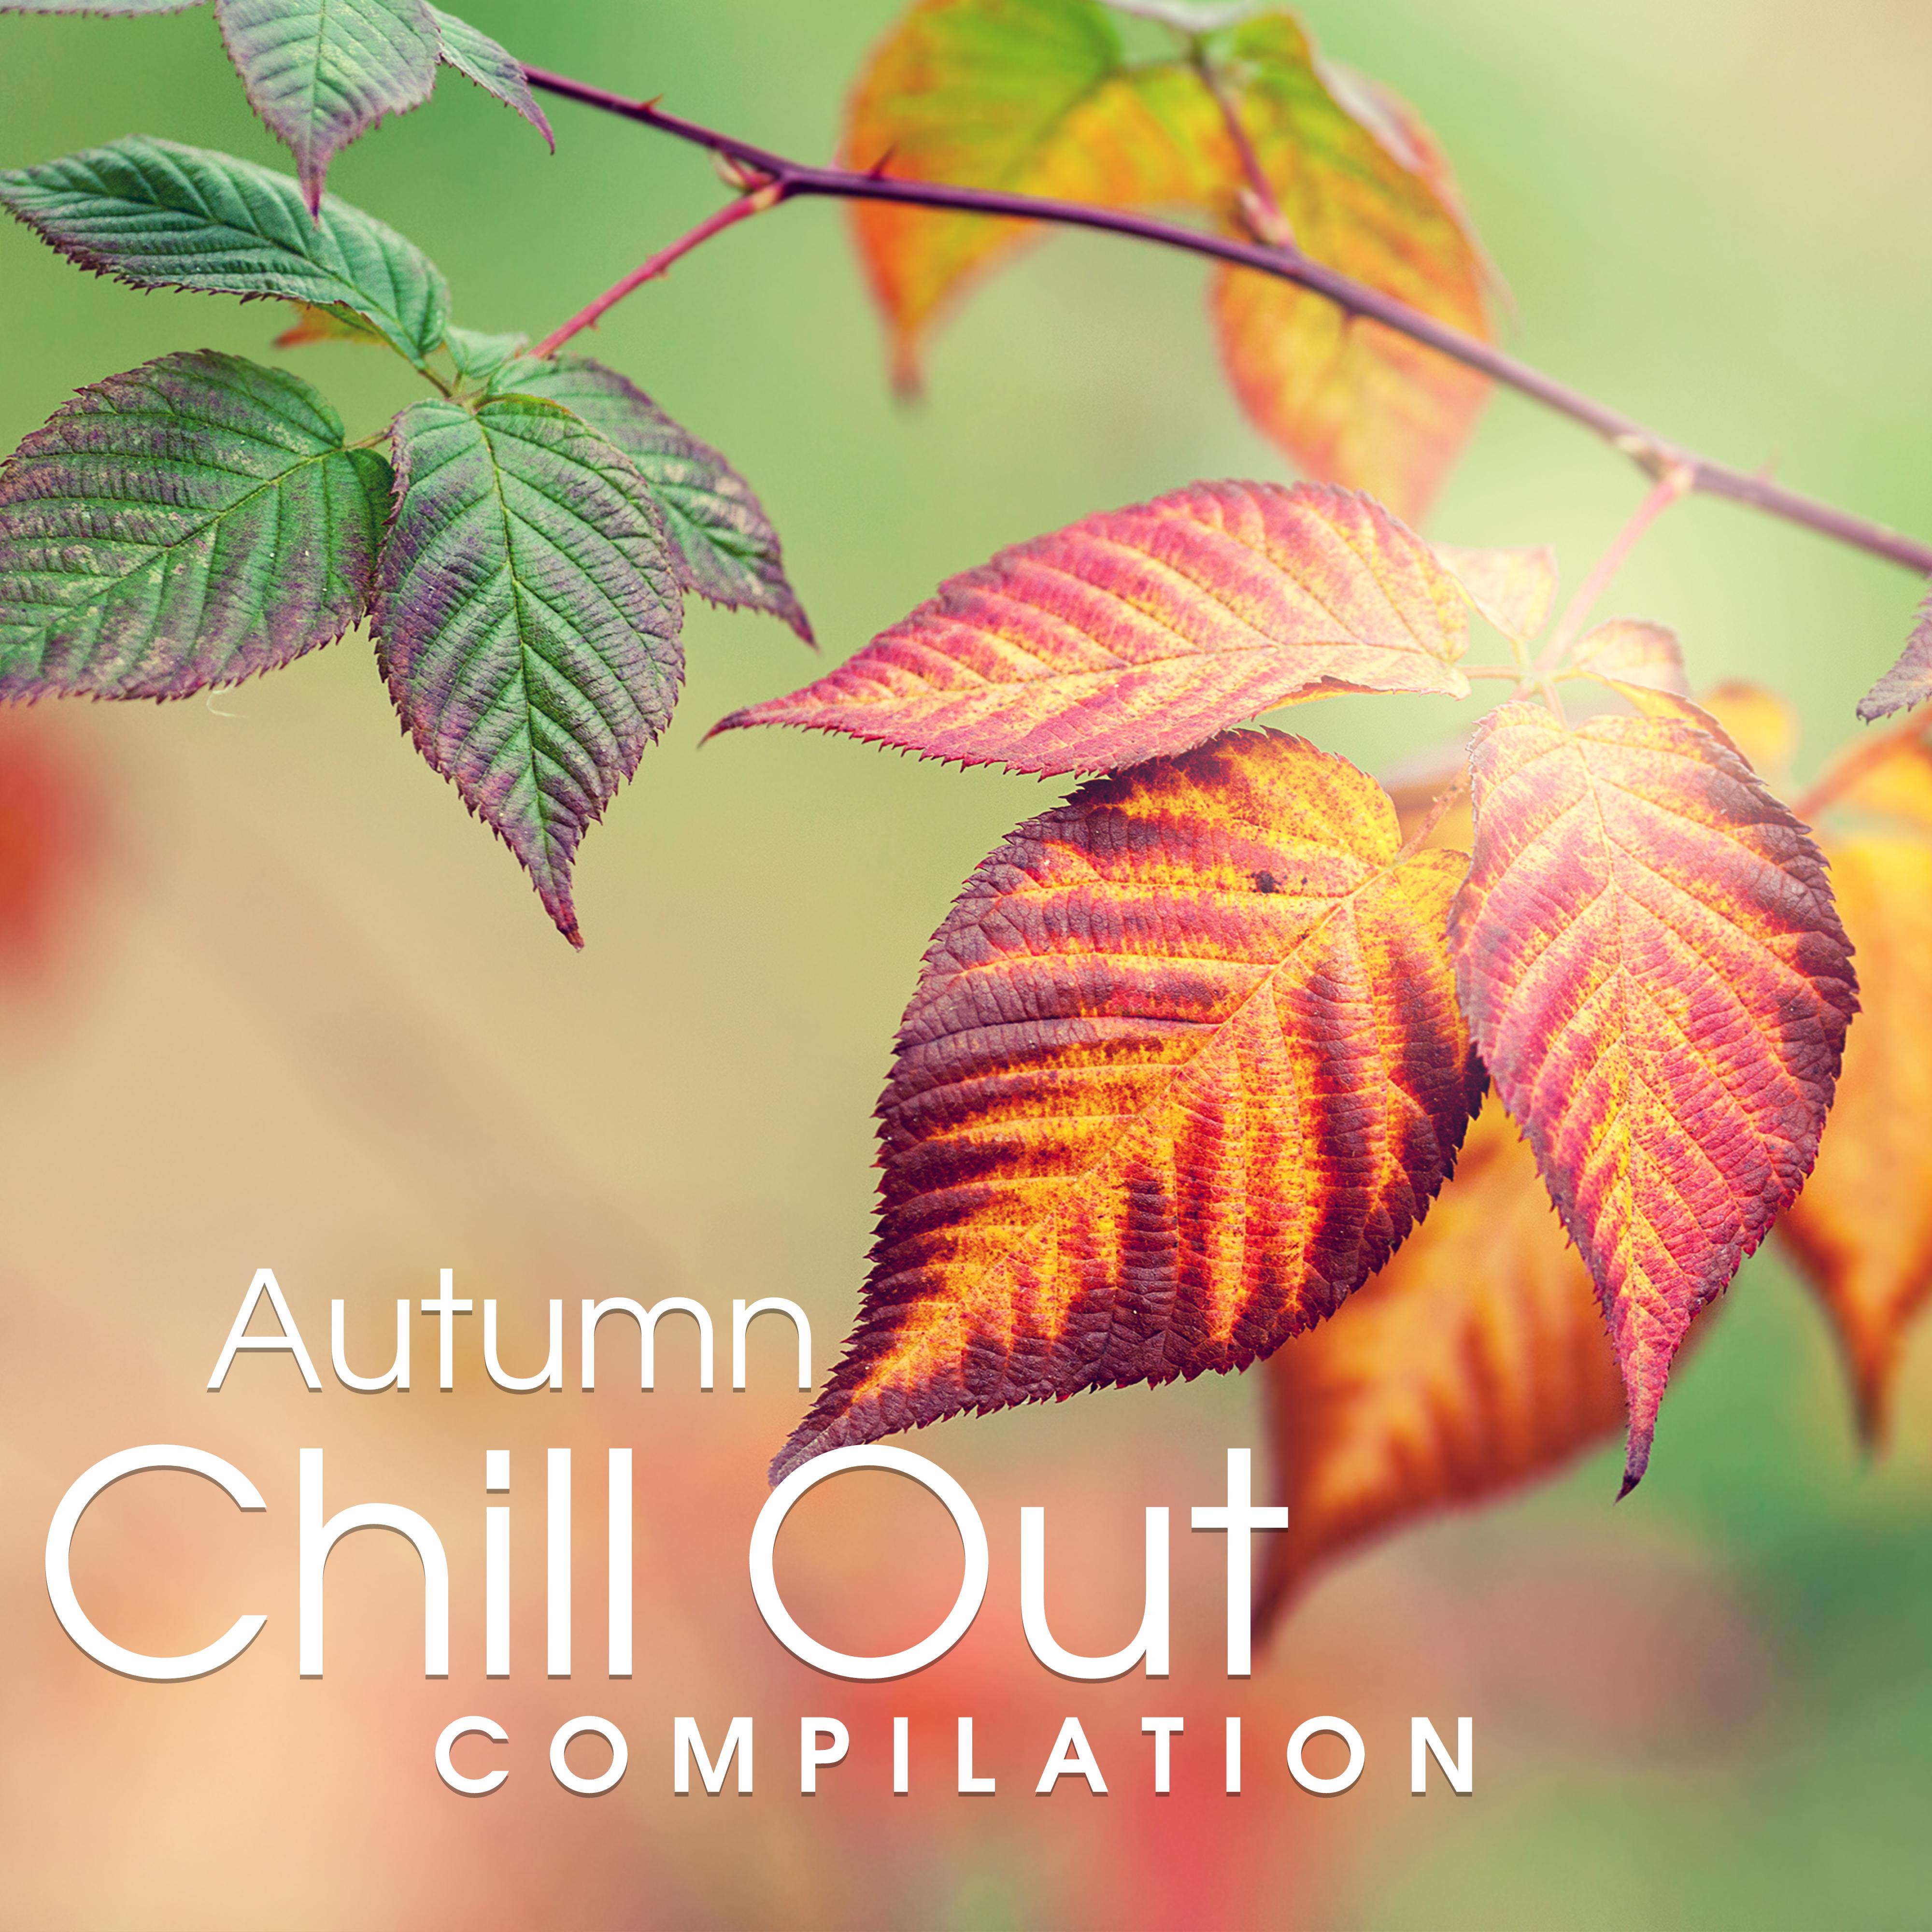 Autumn Chill Out Compilation – New Beats, Chill Out Music, Electronic Vibes, Relax